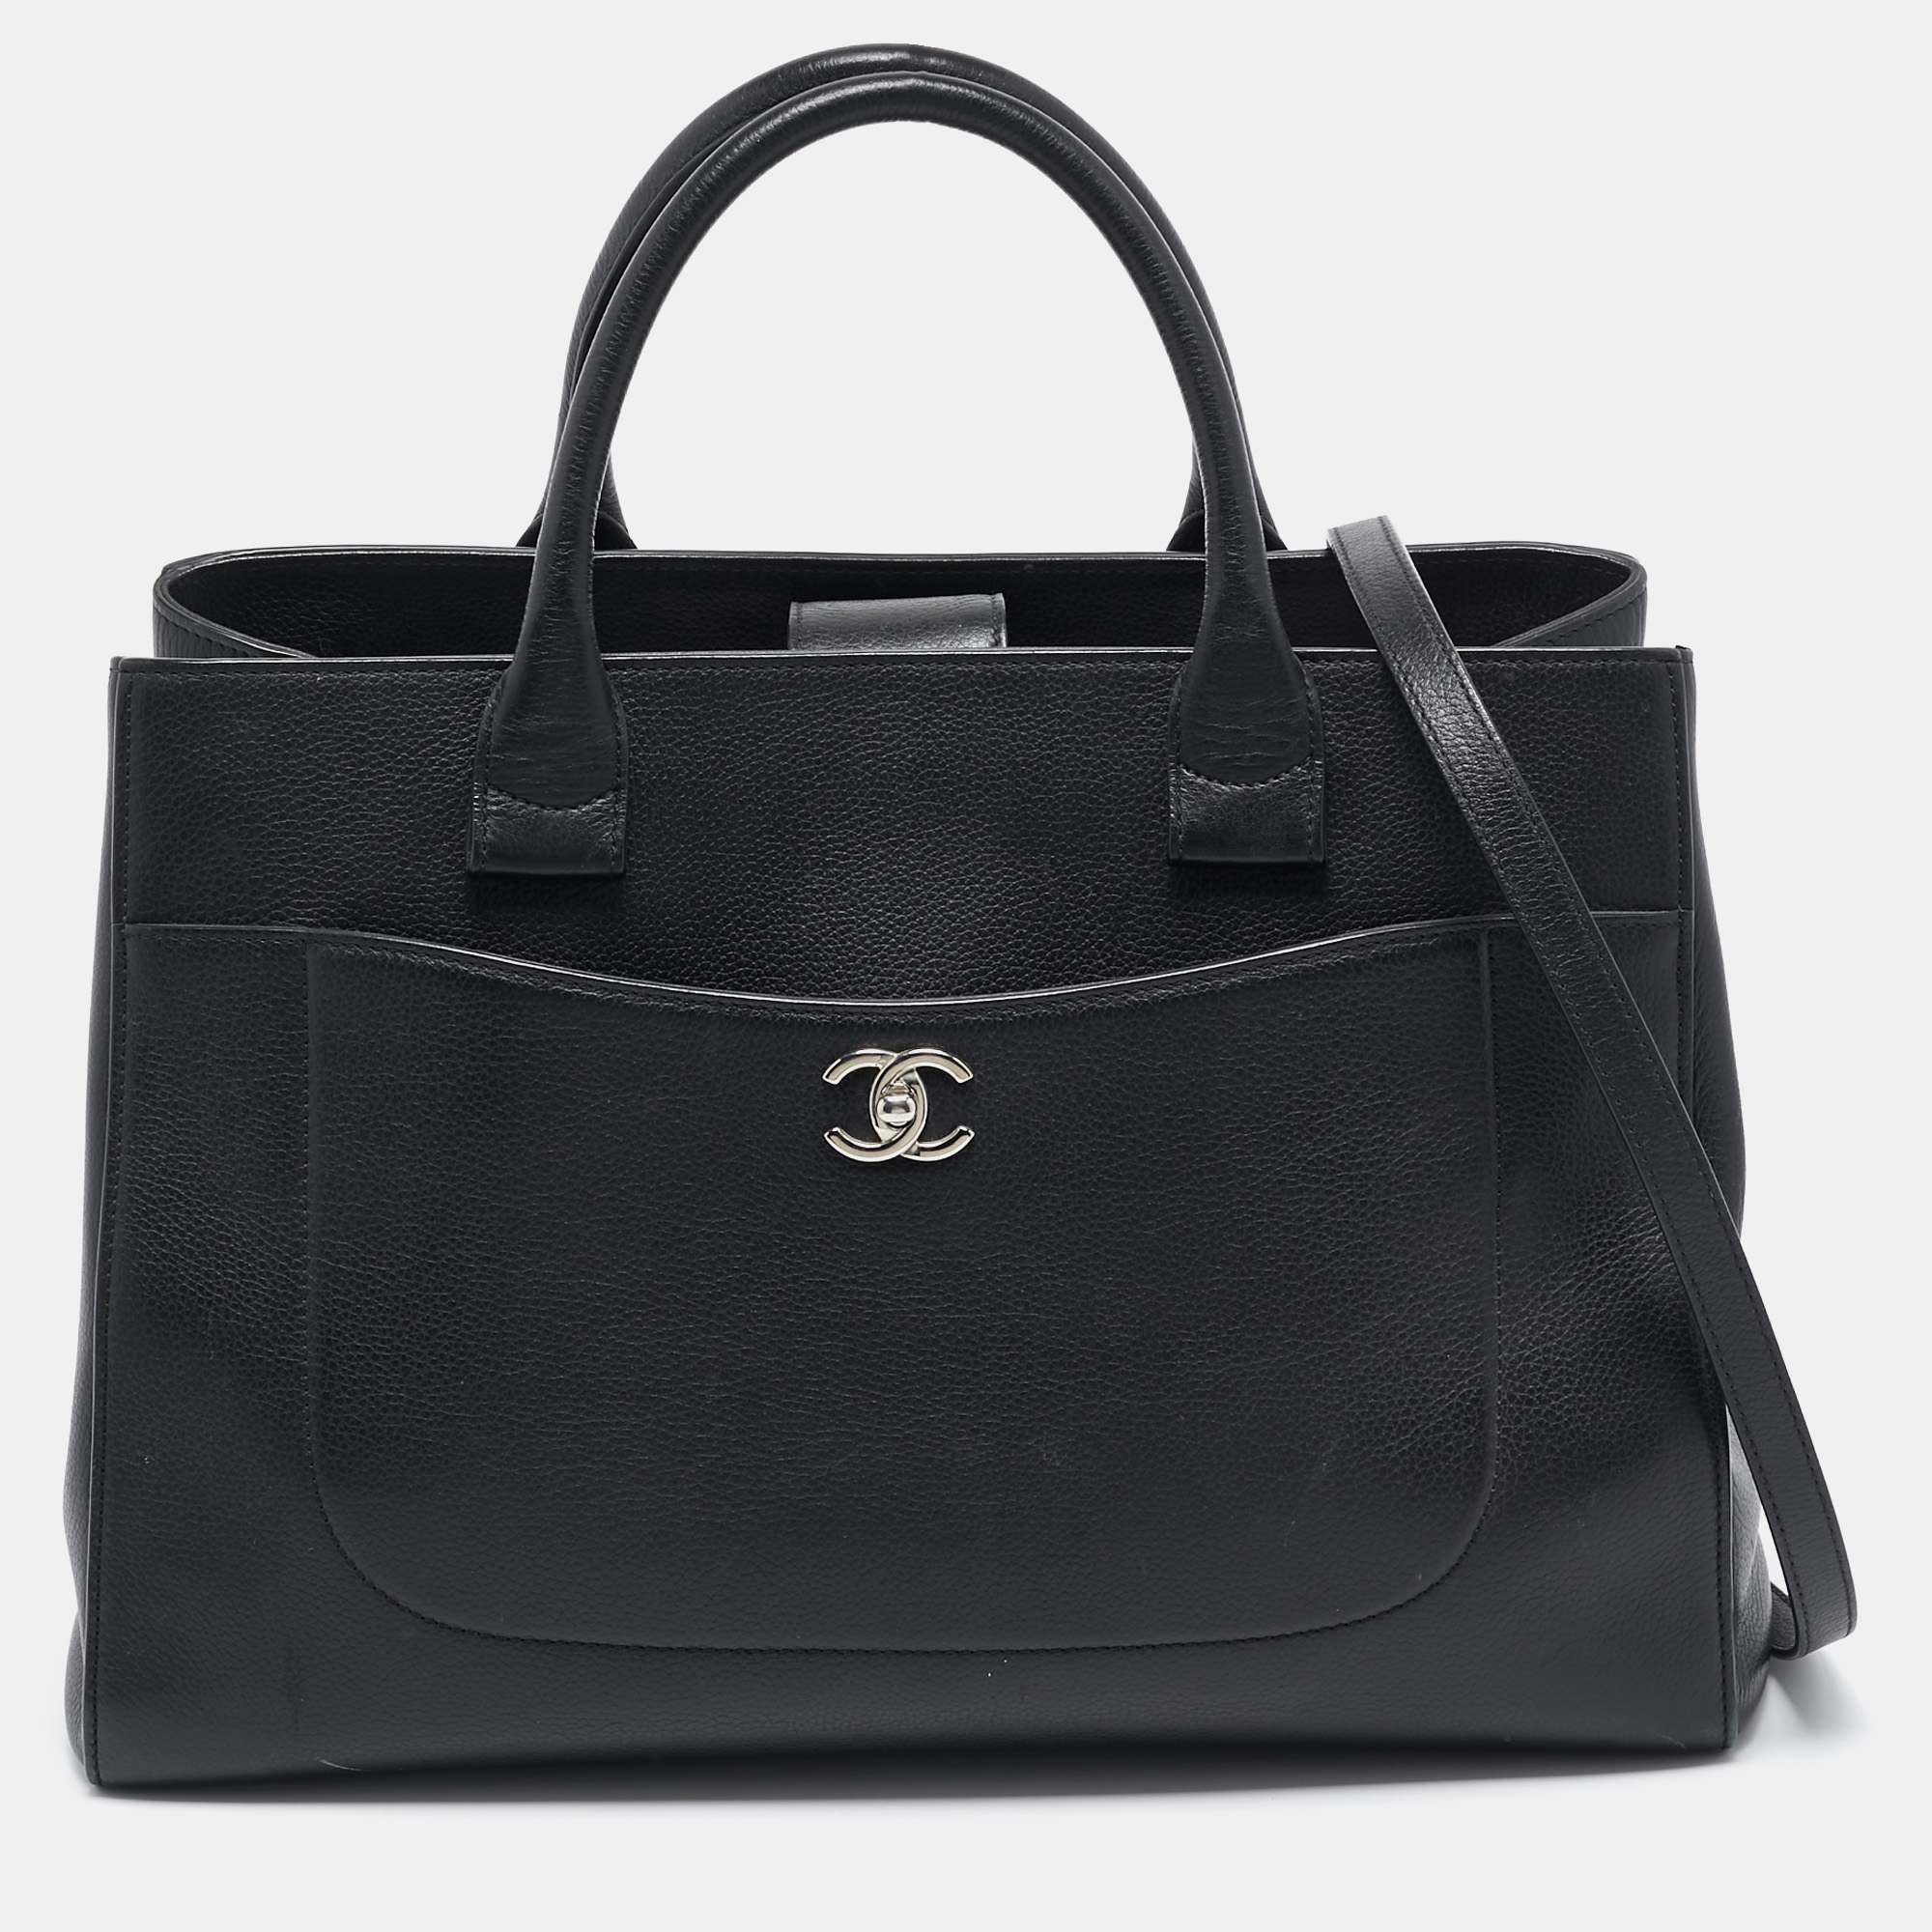 

Chanel Black Leather  Neo Executive Shopping Tote